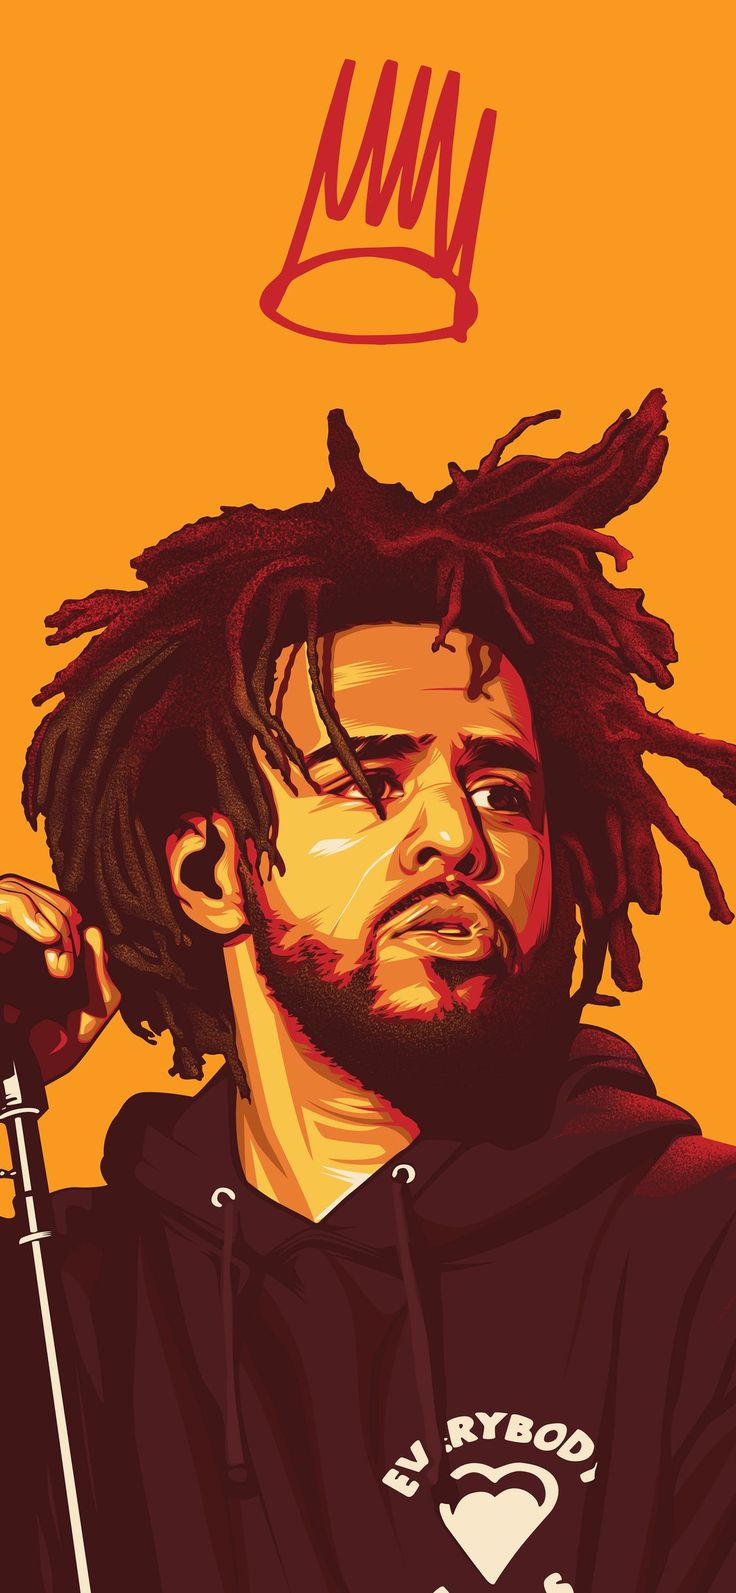 J Cole Album Covers Wallpapers